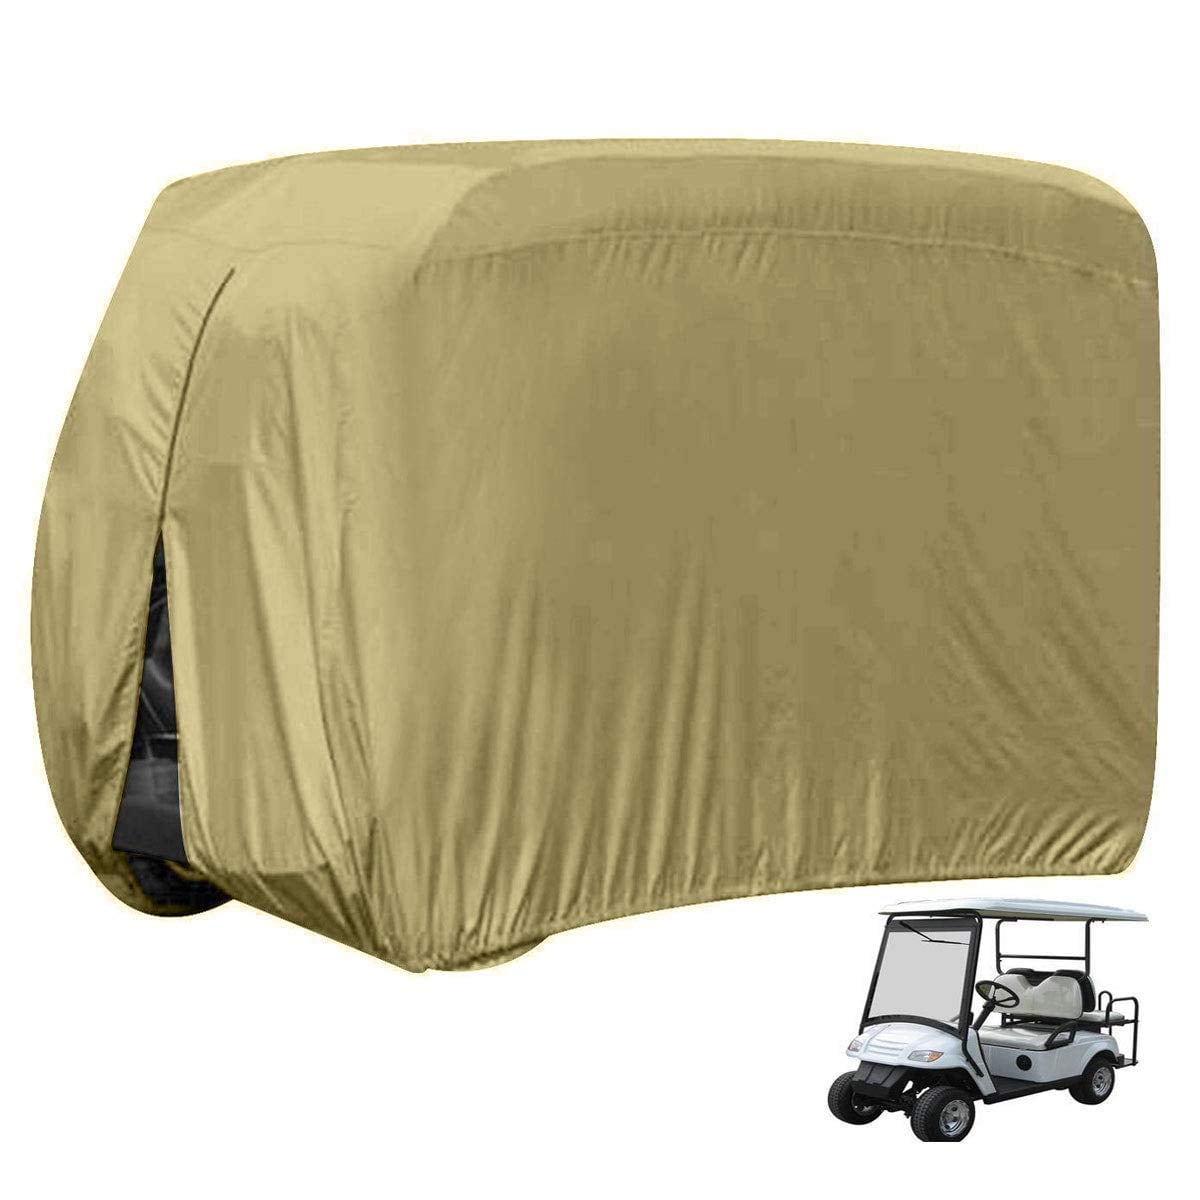 Herchr Golf Cart Protector Durable Waterproof 4 Passenger Storage Cover Car For Ez Go Club Yamaha Com - Seat Covers For 2010 Yamaha Golf Cart